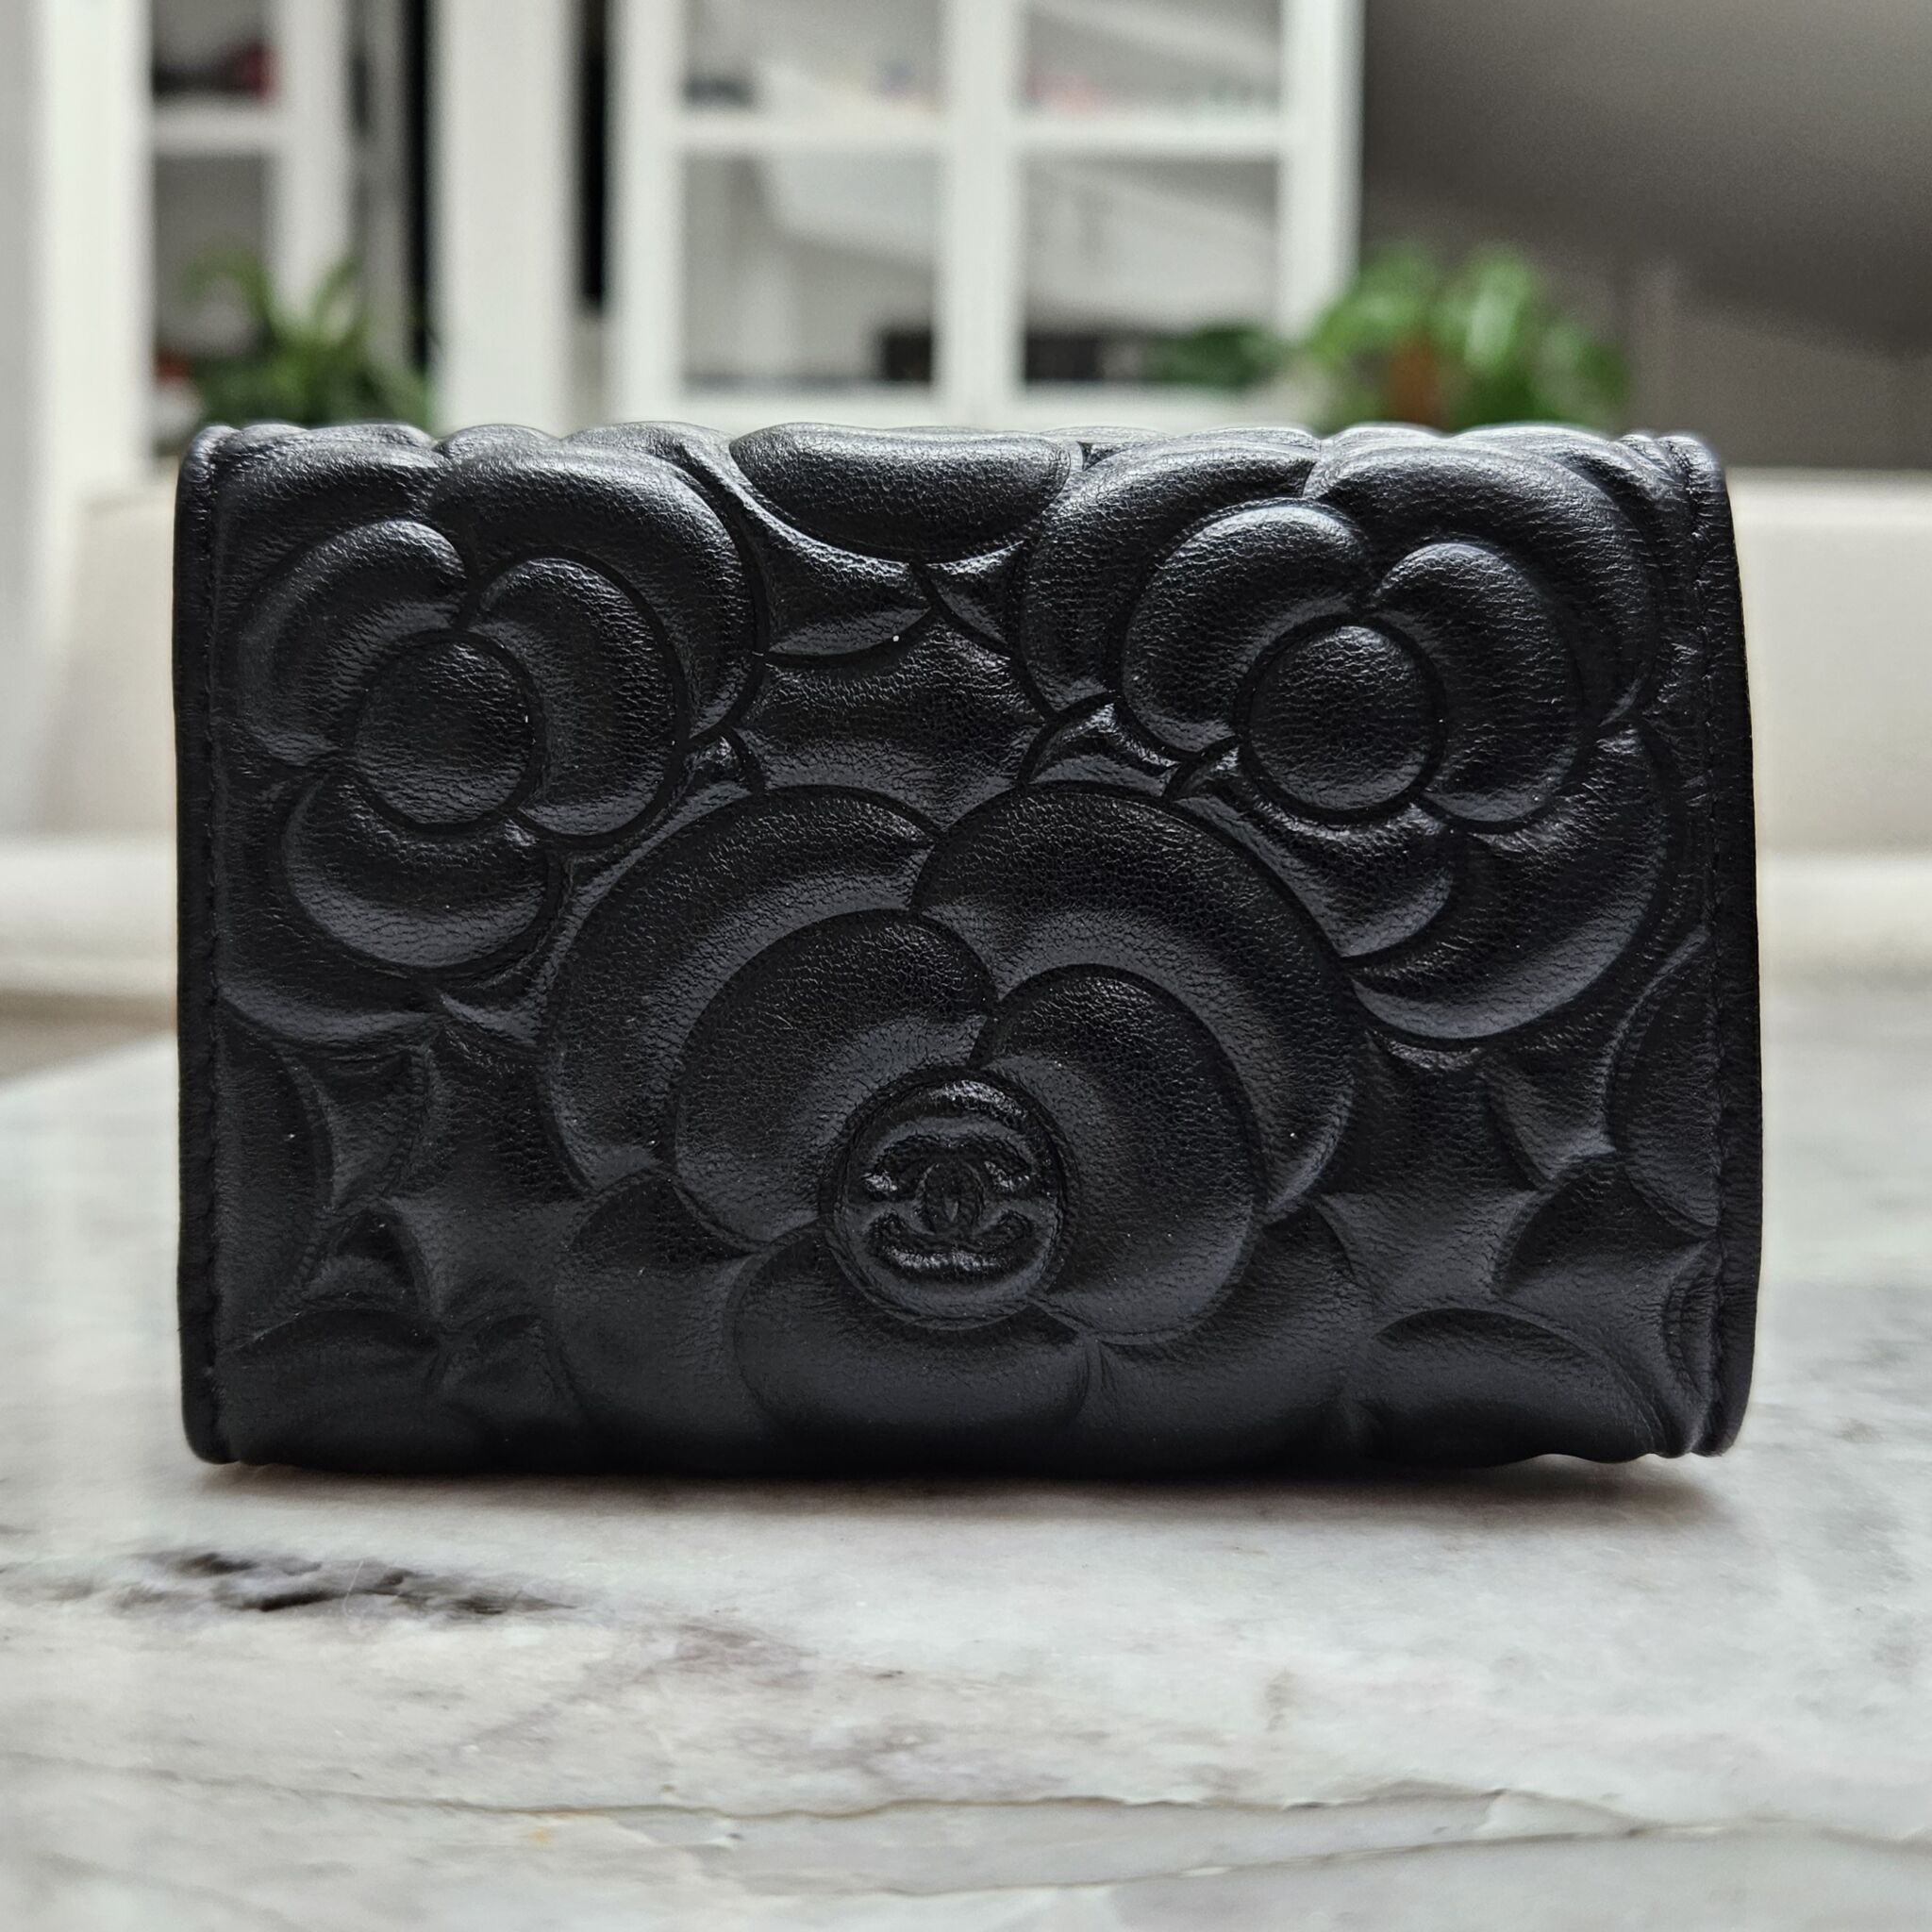 Chanel Camellia Compact Wallet, Lambskin, Black GHW - Laulay Luxury